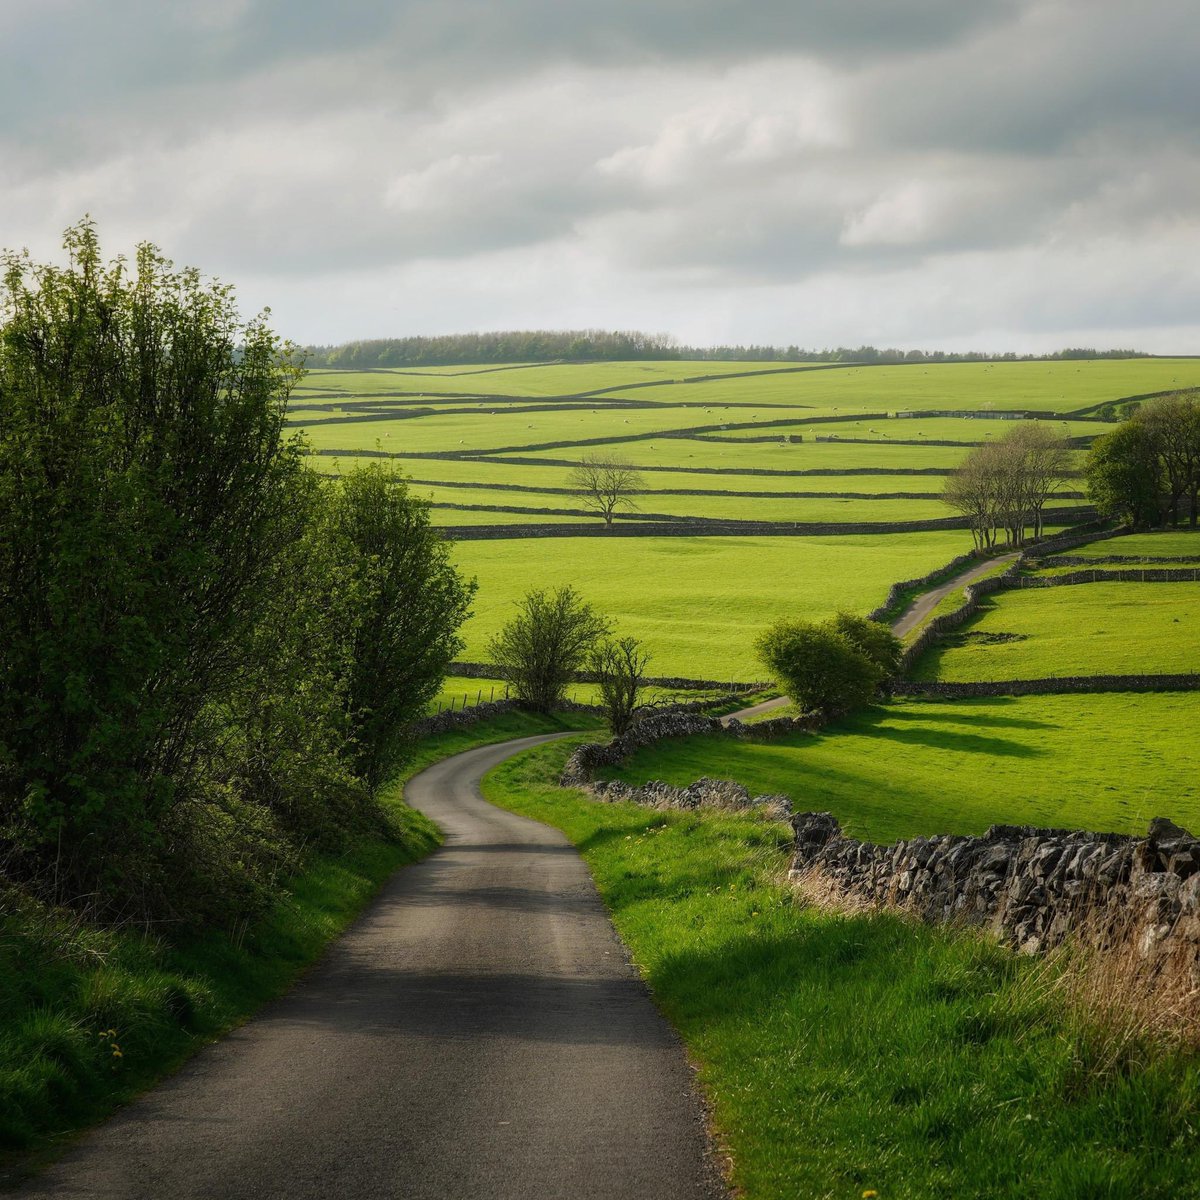 Sometimes, in the noise and the haste of life, it does your soul good to just stand in the quiet and stare at an open road stretching through the fields of green, full of possibilities. If only reality didn't call quite so loudly with work and bills and laundry. #peakdistrict